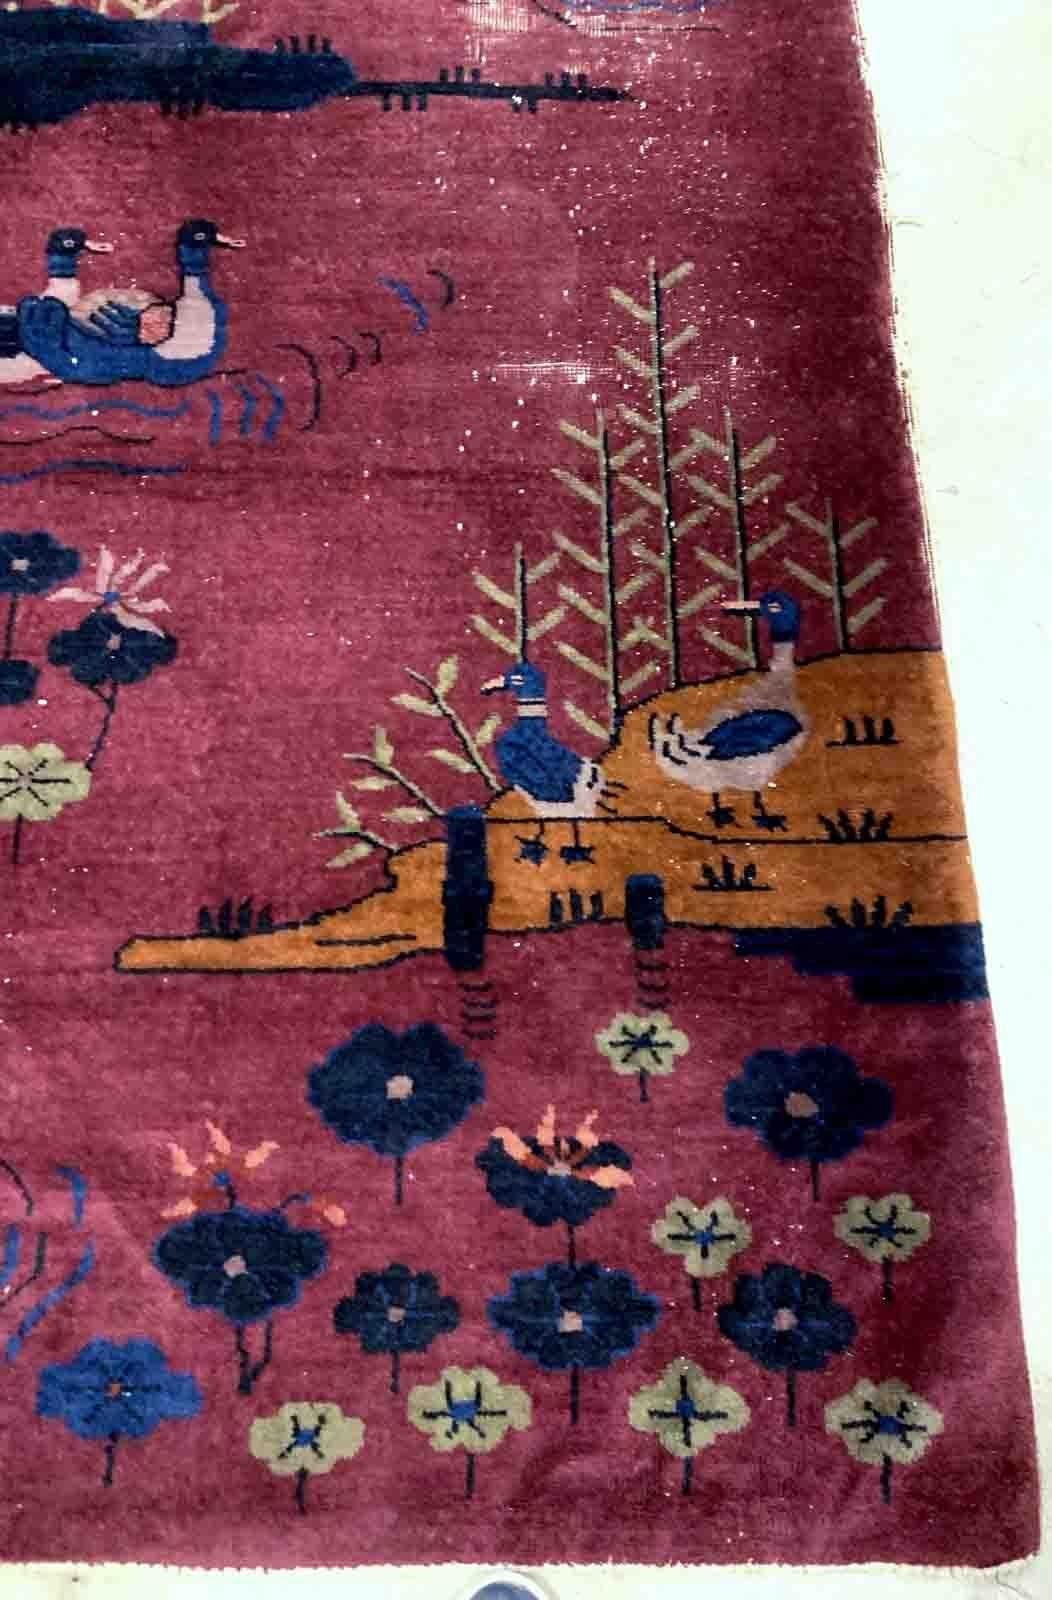 Handmade antique Art Deco Chinese rug in burgundy color with some ducks design. The rug is from the beginning of 20th century in original condition, it has some low pile.

-condition: original, some low pile,

-circa: 1920s,

-size: 4.1' x